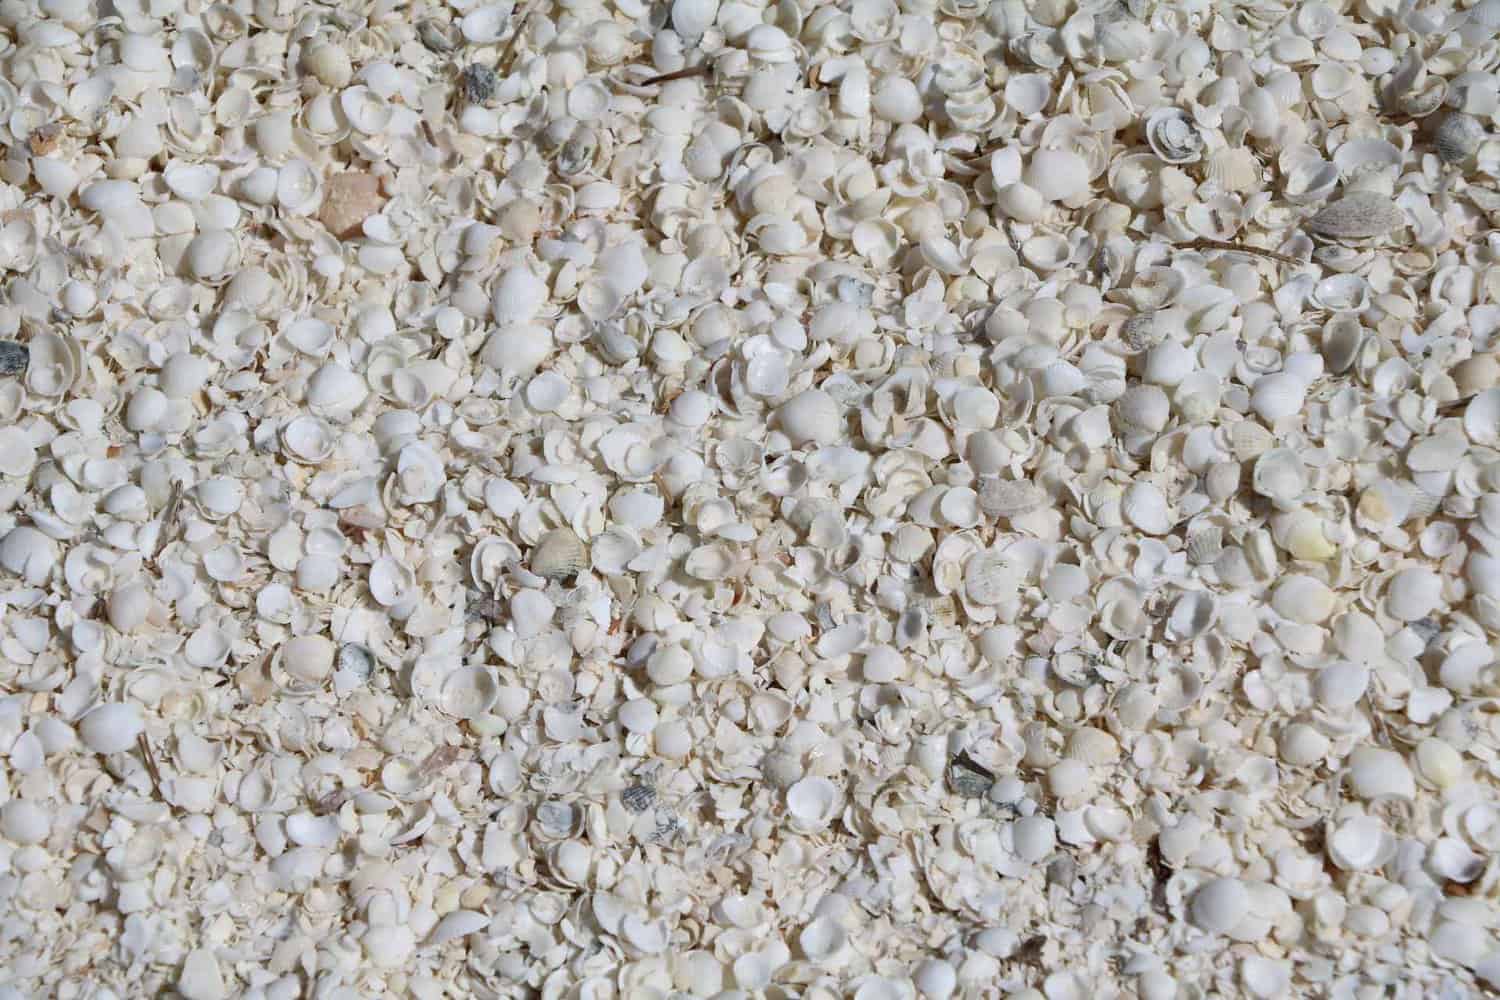 Close-up view of the unique Shell Beach in Shark Bay, Denham, revealing millions of tiny shells that create the picturesque shoreline during the Perth to Exmouth adventure, showcasing the area's natural beauty